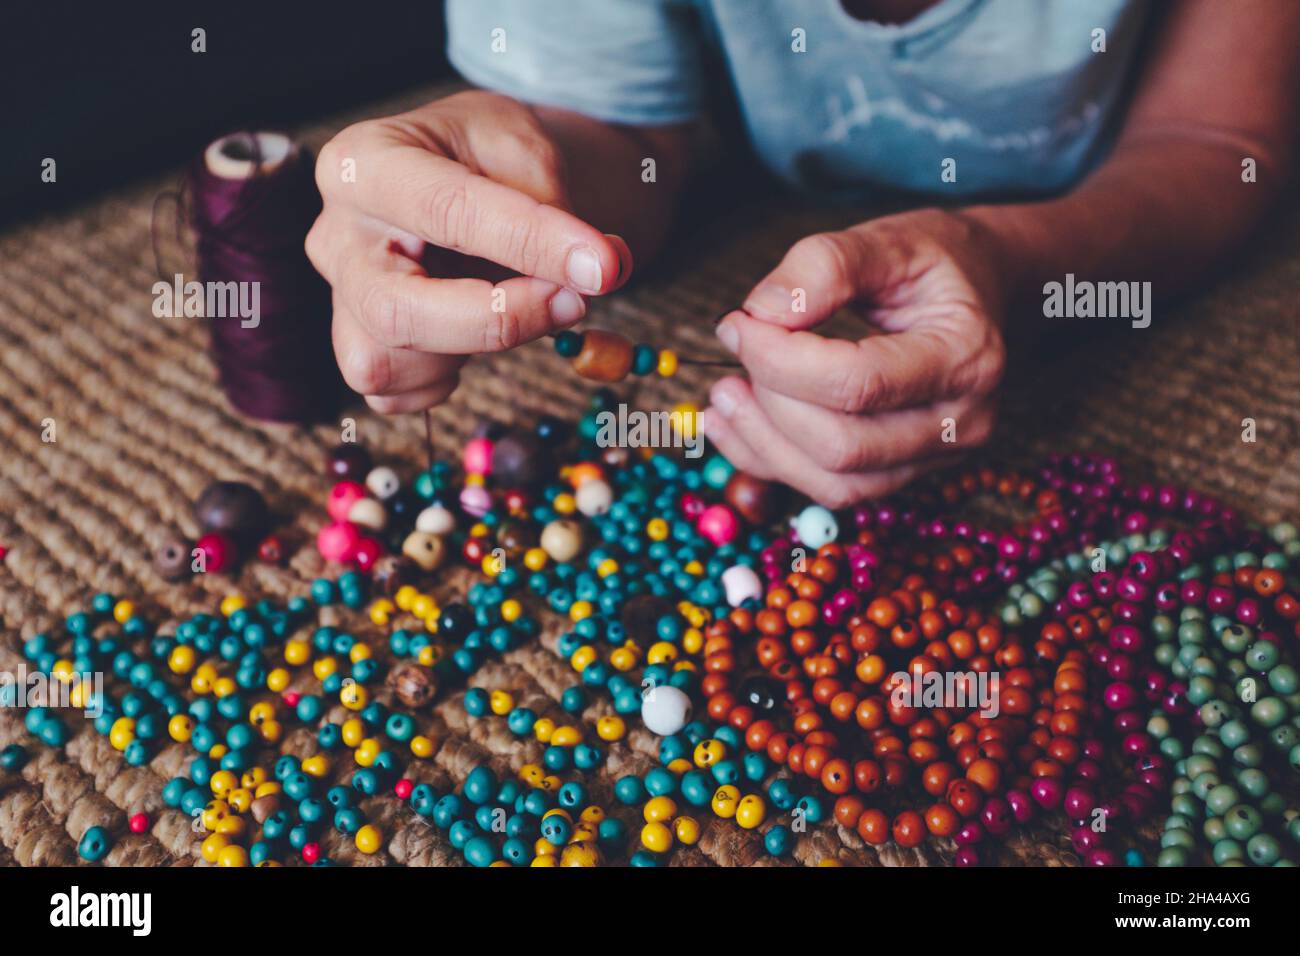 close up of woman hands doing hobby creative beads jewels at home on the carpet. people and diy leisure indoor activity Stock Photo